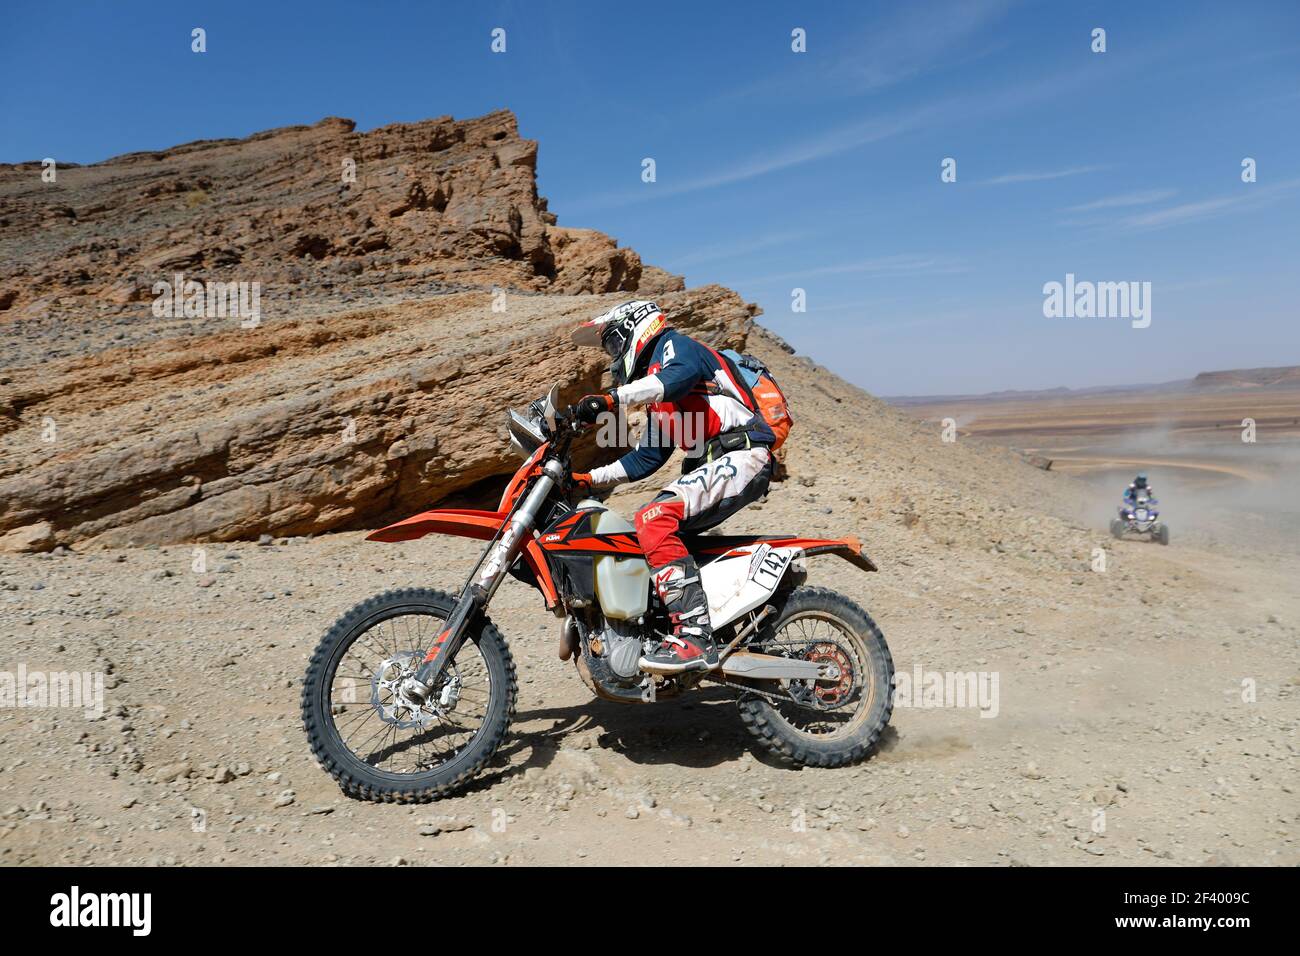 142 PUILLET Thierry (FRA), KTM EXCF 450, Enduro Cup, action during Rally of Morocco 2018, Stage 3, Erfoud to Erfoud, october 7 - Photo Frederic Le Floc'h / DPPI Stock Photo